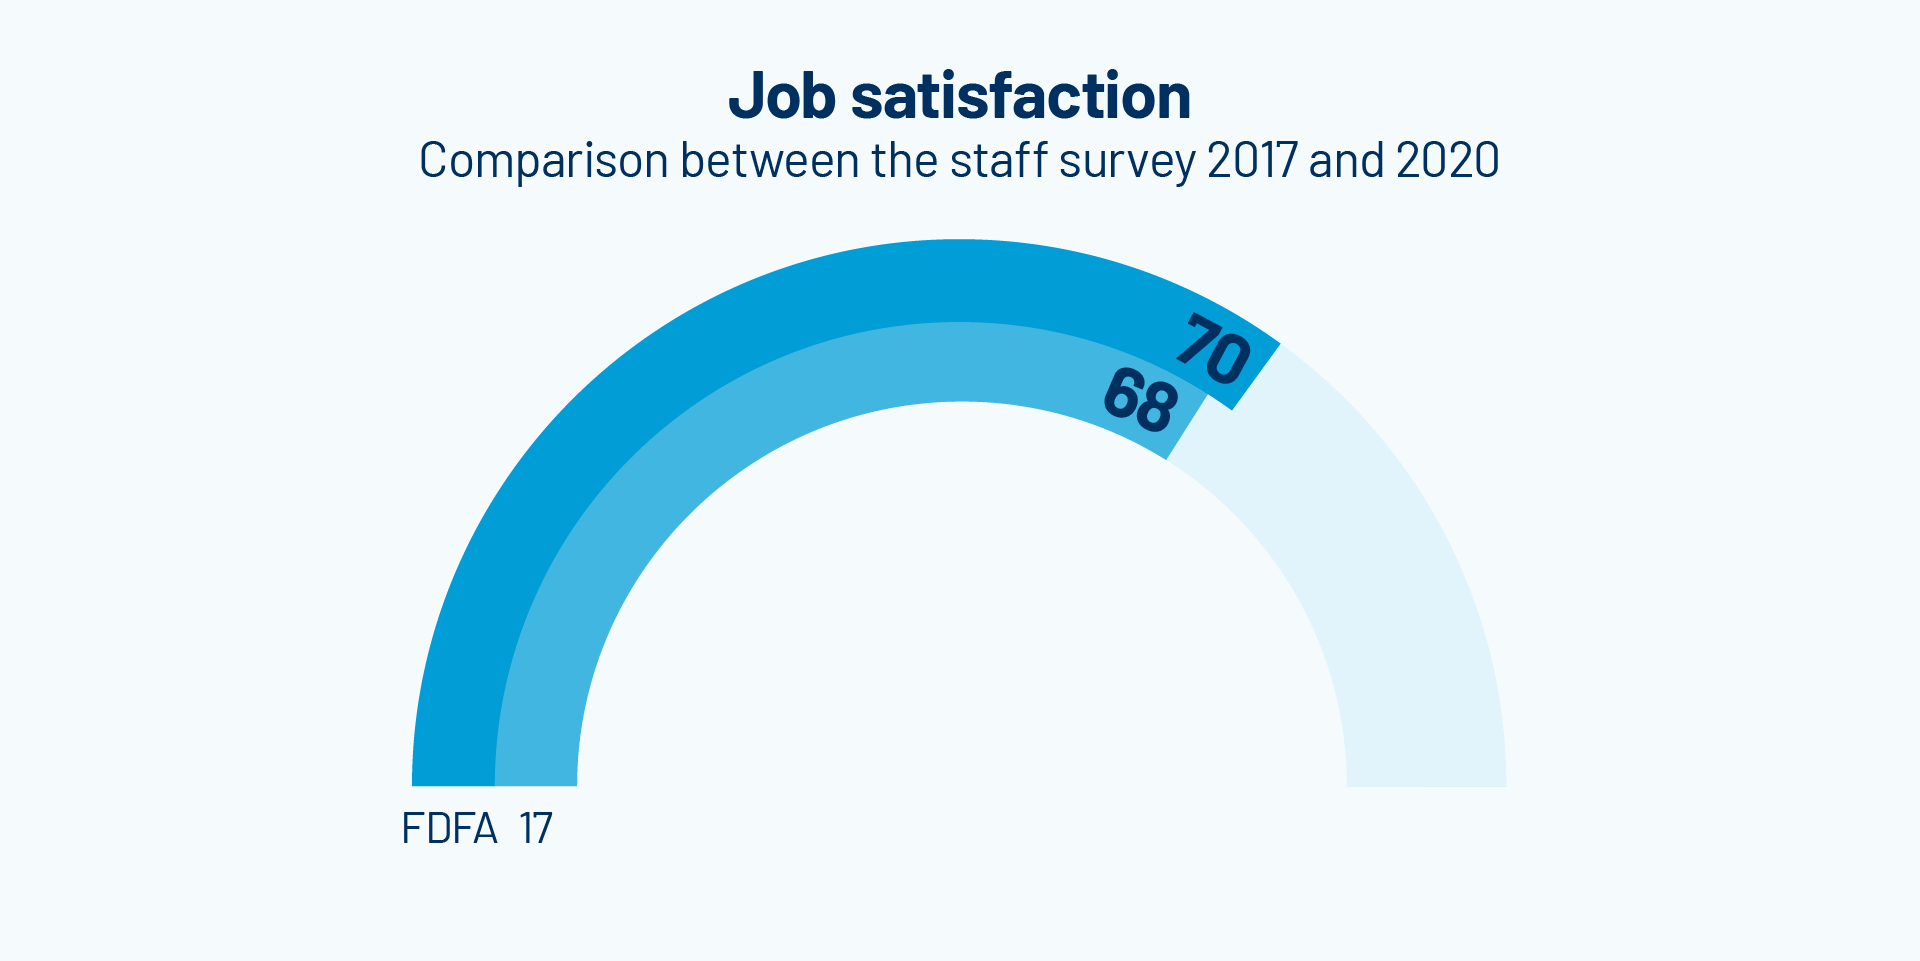 A graph showing that job satisfaction among FDFA staff has risen from 68 to 70 points.